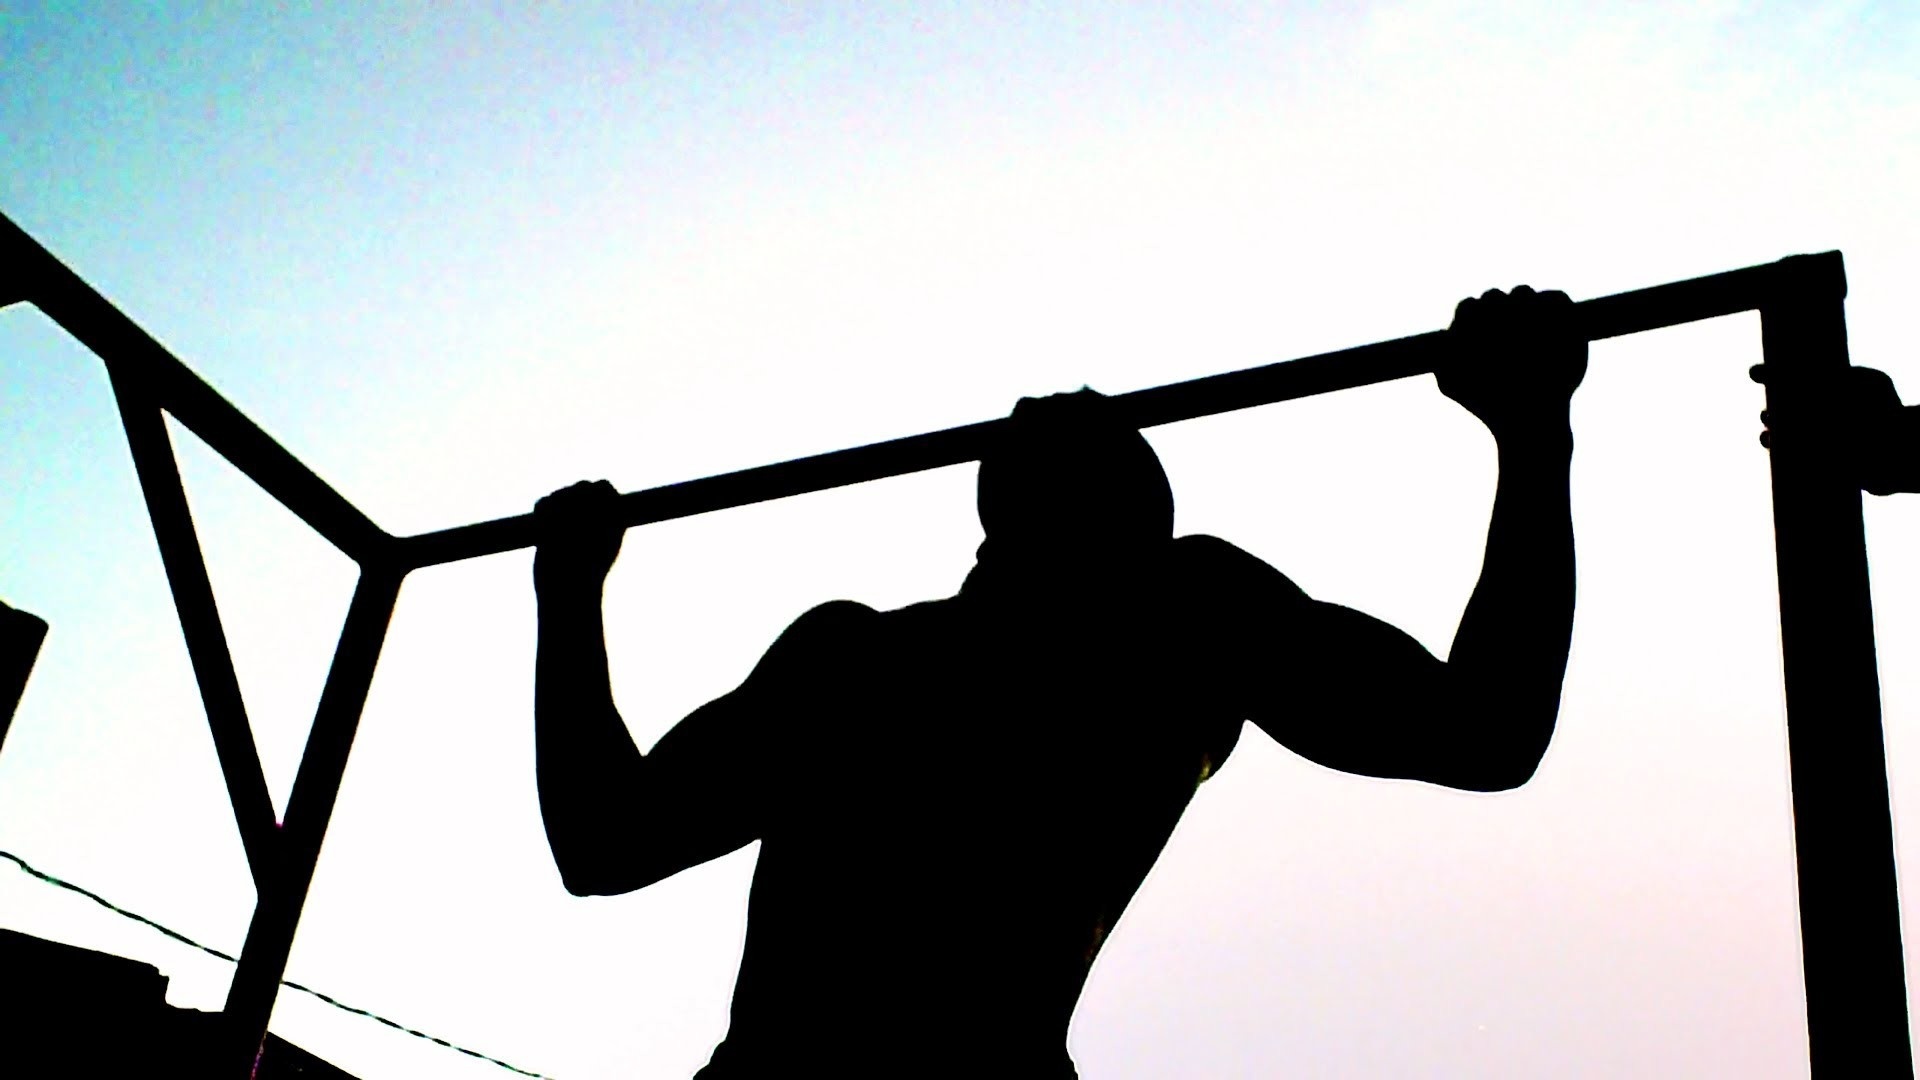 Calisthenics: A set of pull-ups, Street workout, Action sports. 1920x1080 Full HD Background.